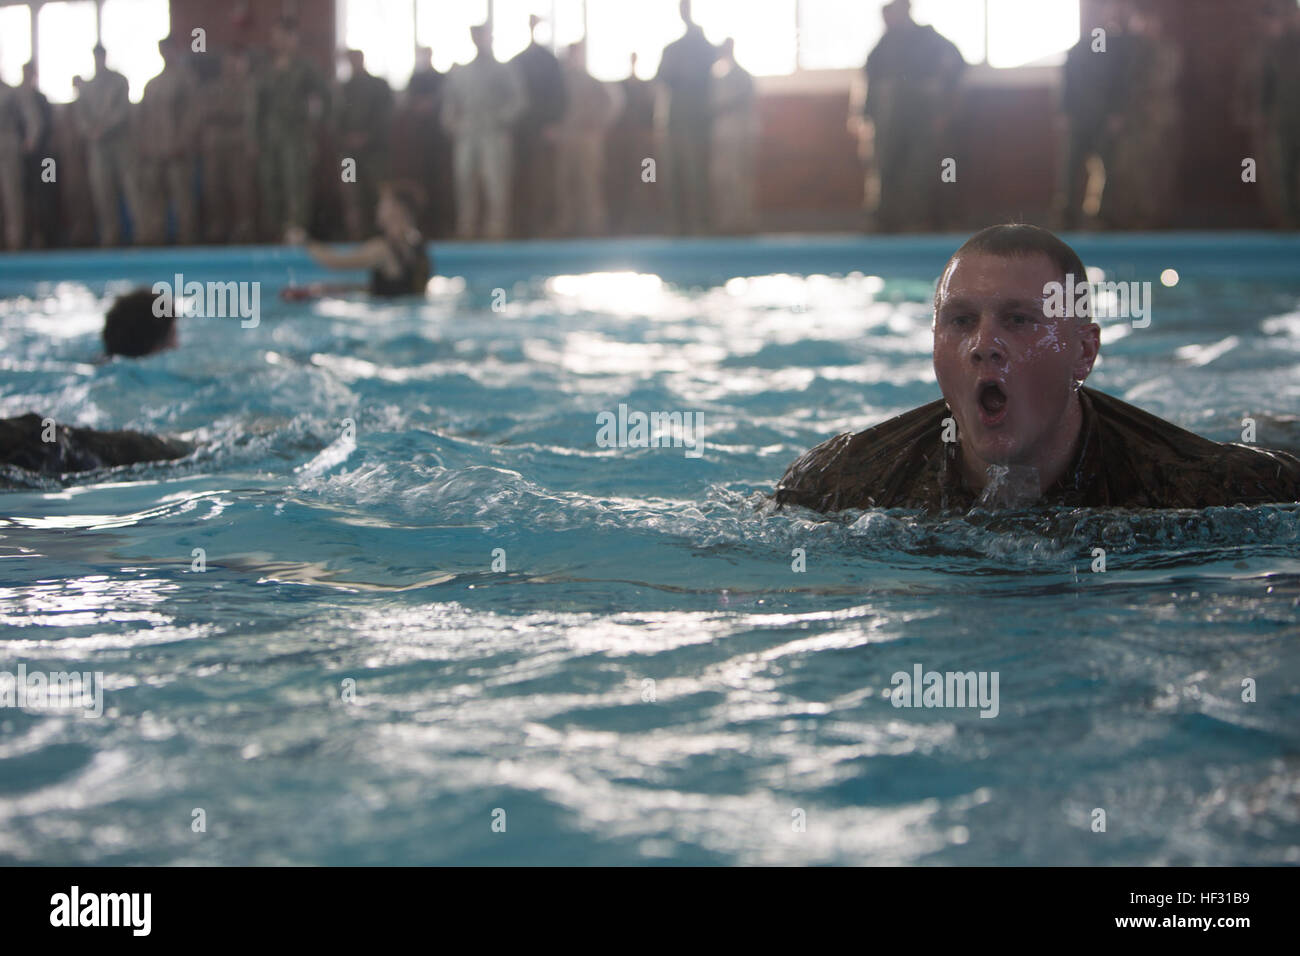 Corporal Daniel Wargo, a fire support man with 2nd Air Ground Liaison Company, performs a 25 meter swim during a swim qualification aboard Marine Corps Base Camp Lejeune, March 5, 2015. Marines have to get recertified in water survival every two years on active duty, or every three years if they pass the intermediate swim qualification. (Official Marine Corps photo by Cpl. Scott W. Whiting) Marines get their feet wet during swim qualification 150305-M-FD819-637 Stock Photo